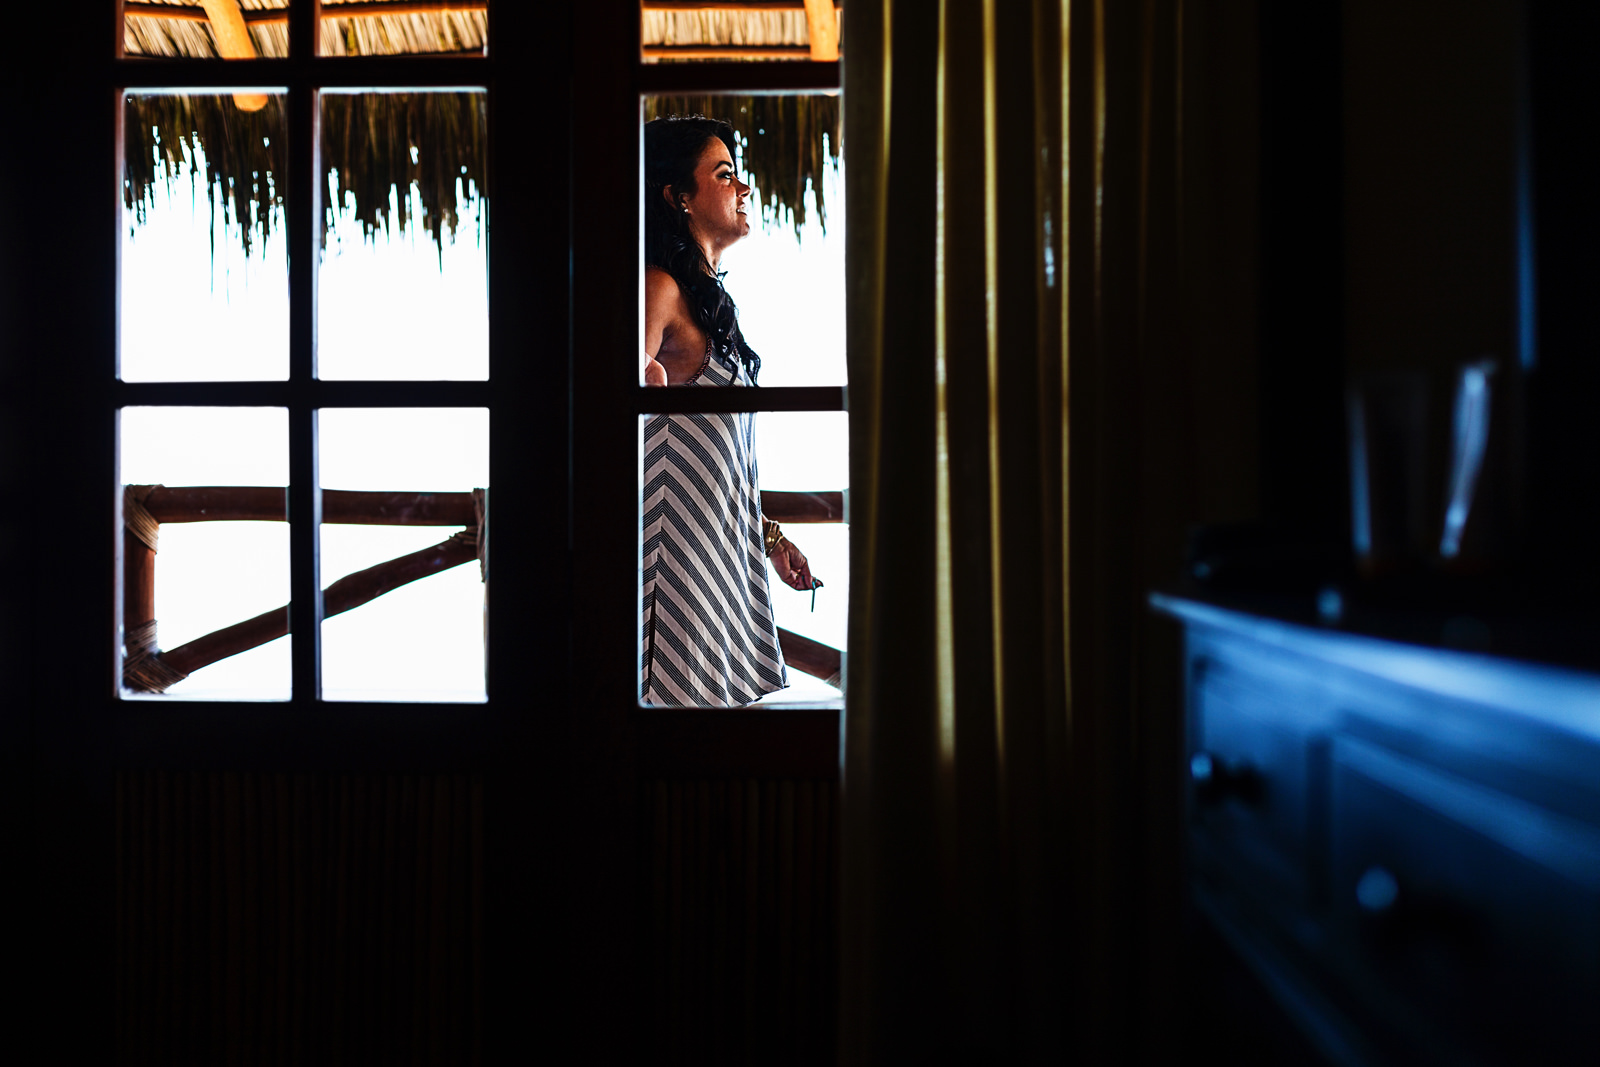 A girl can be seen through a window having a cigarette break out in the balcony of the room where all girls are getting ready for the wedding